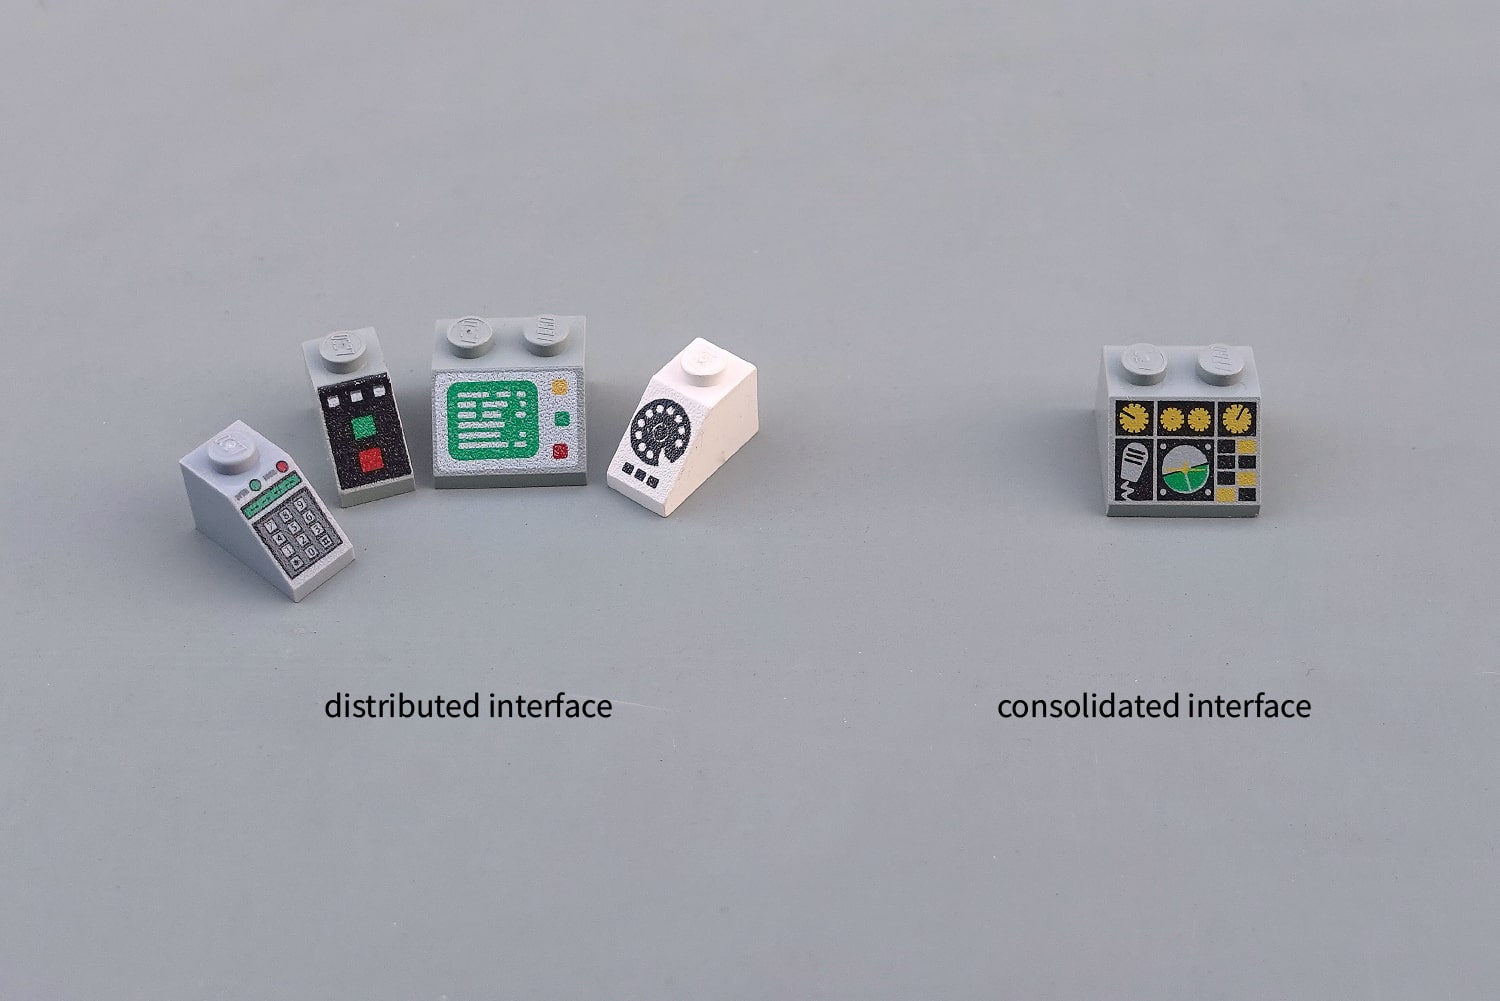 Lego vehicle dashboard: distributed (left) vs. consolidated (right)